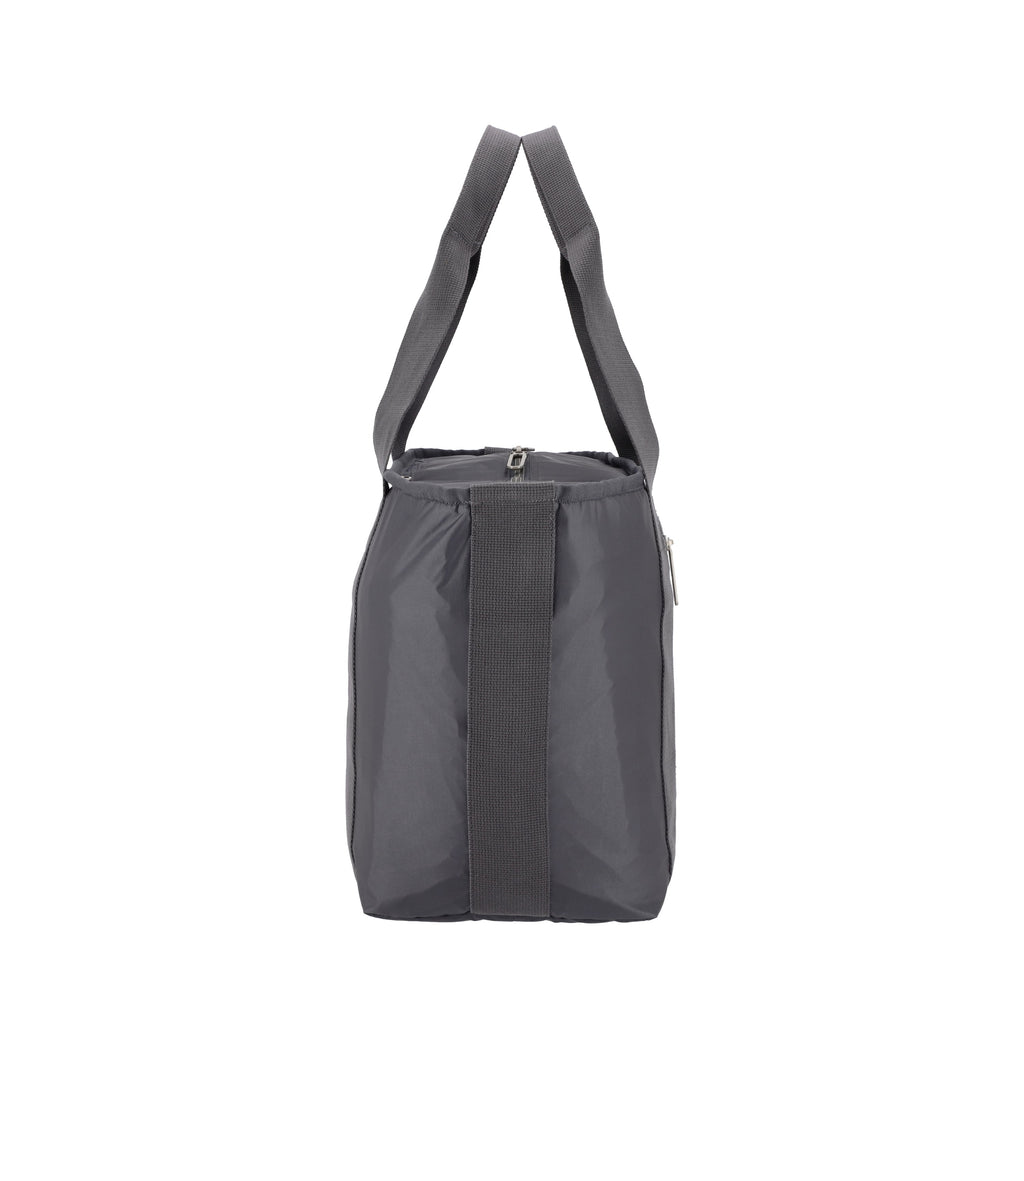 Essential East/West Tote - 24642704277552